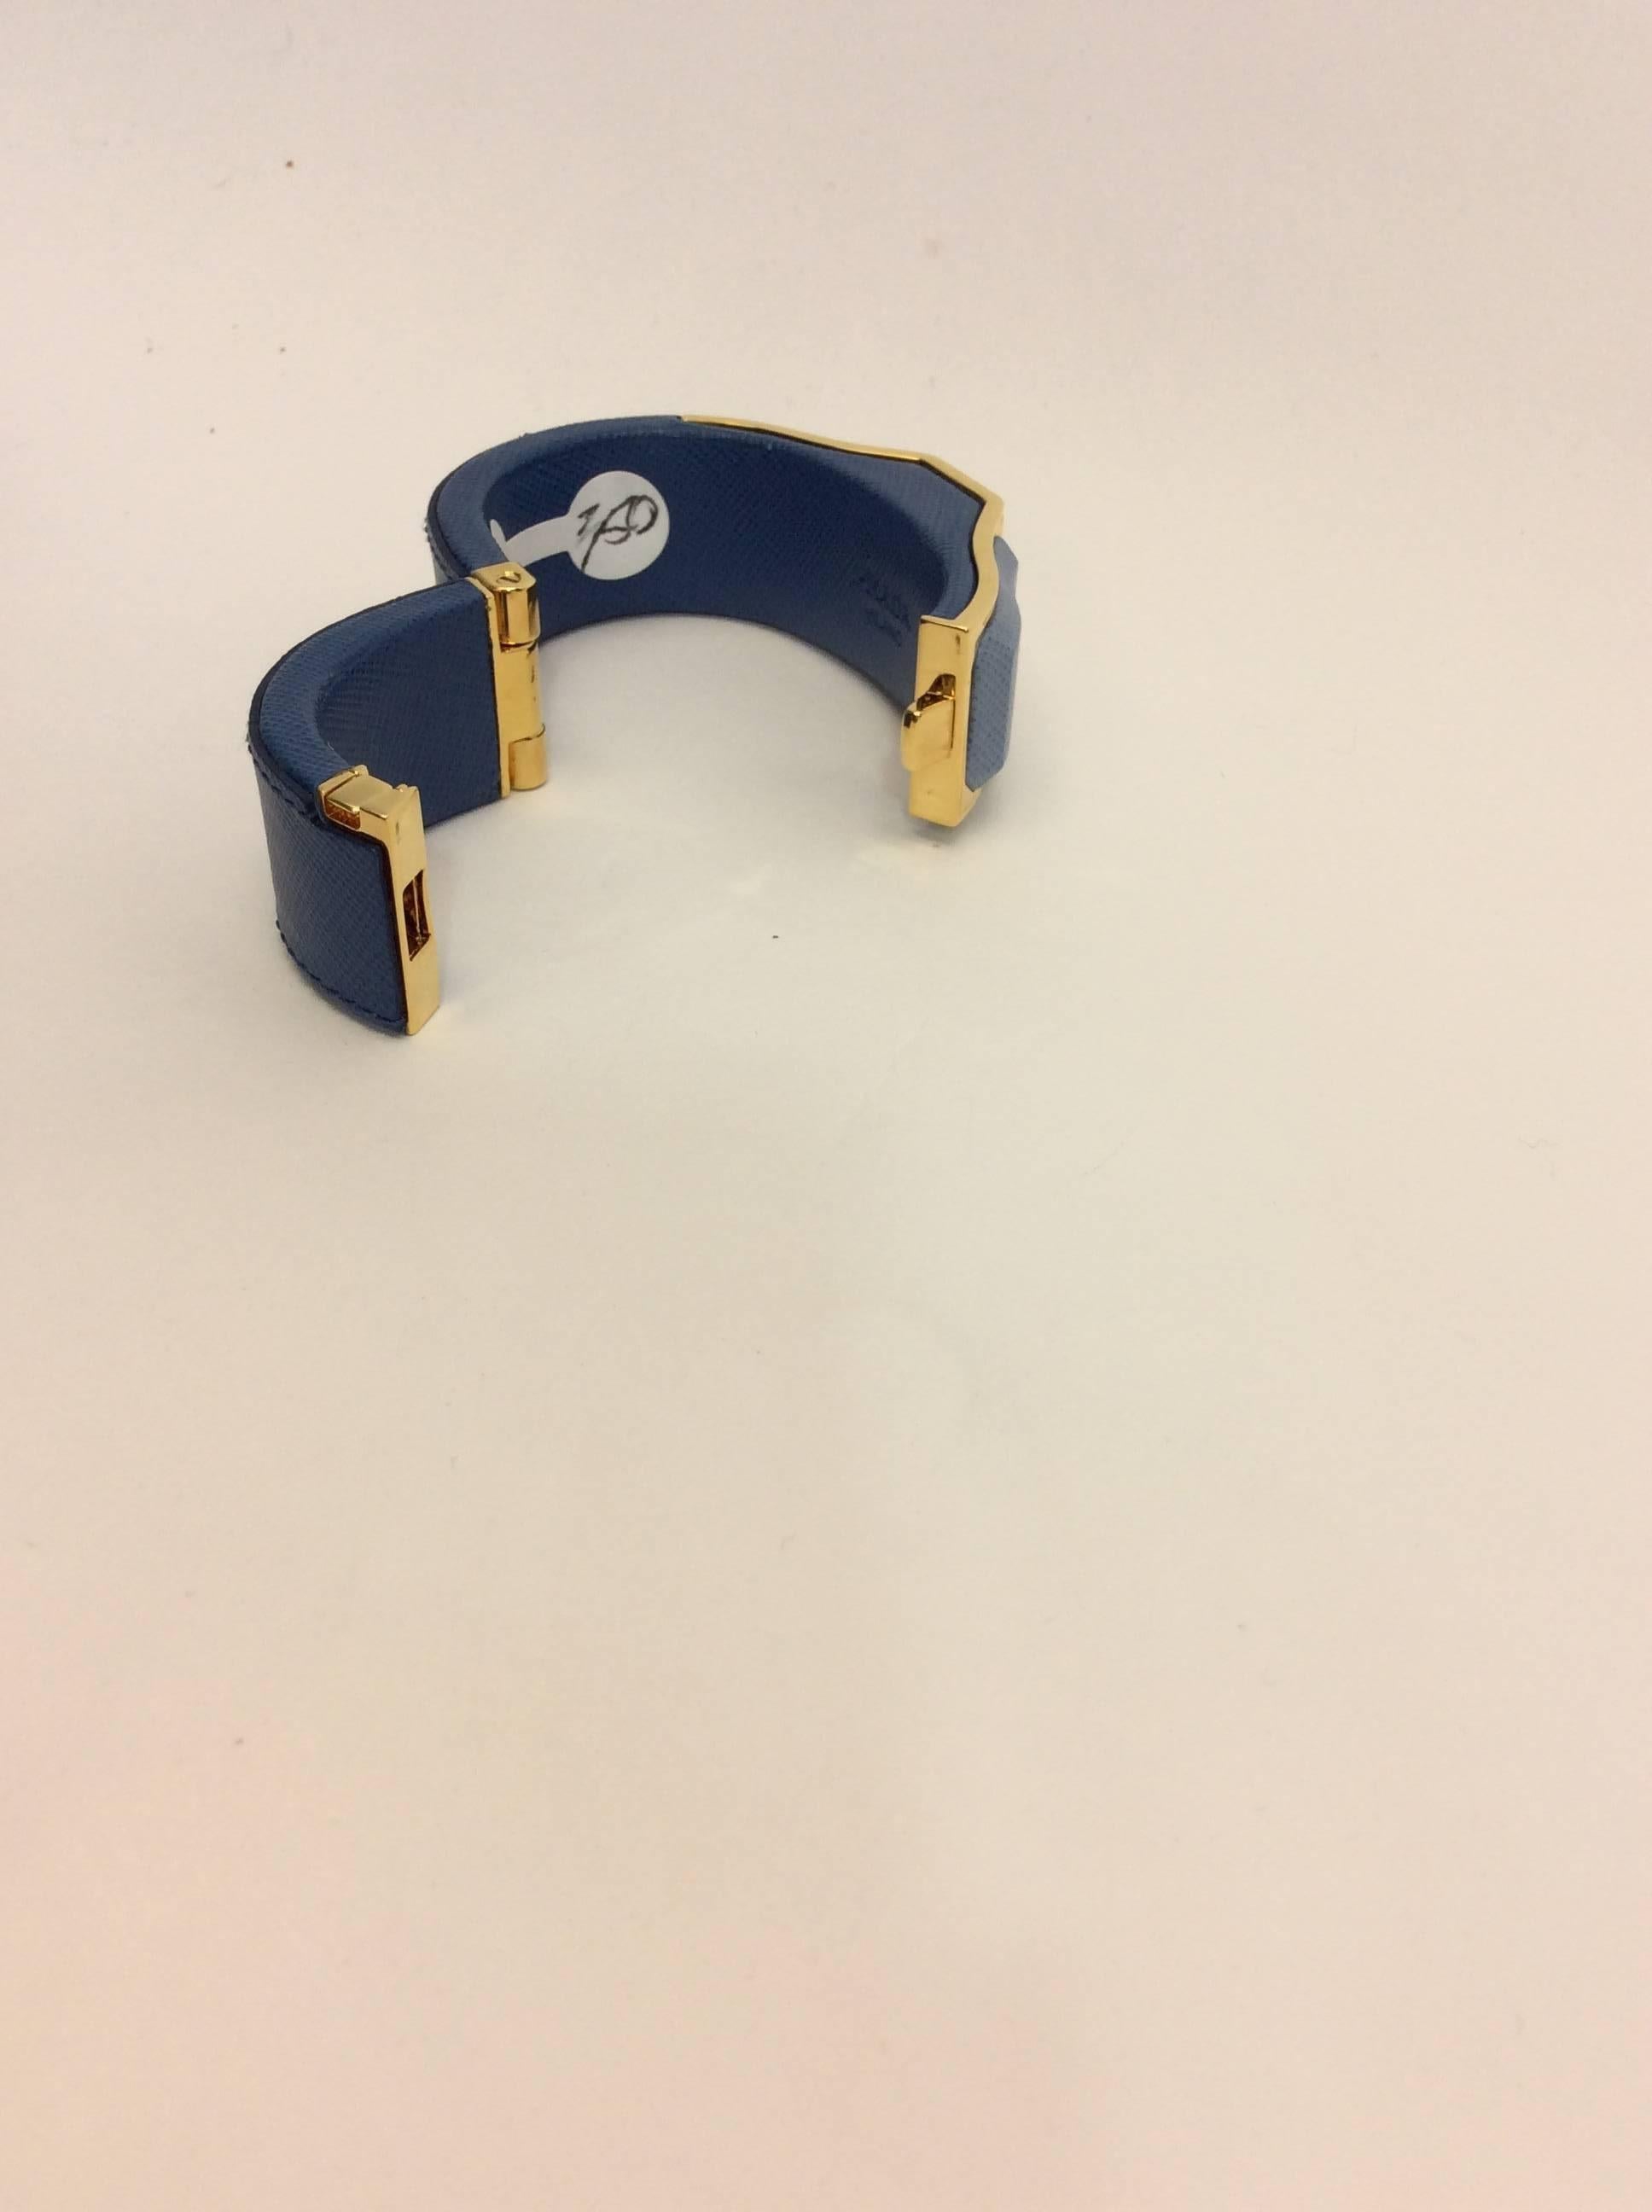 Prada Blue Leather Cuff In Excellent Condition For Sale In Narberth, PA